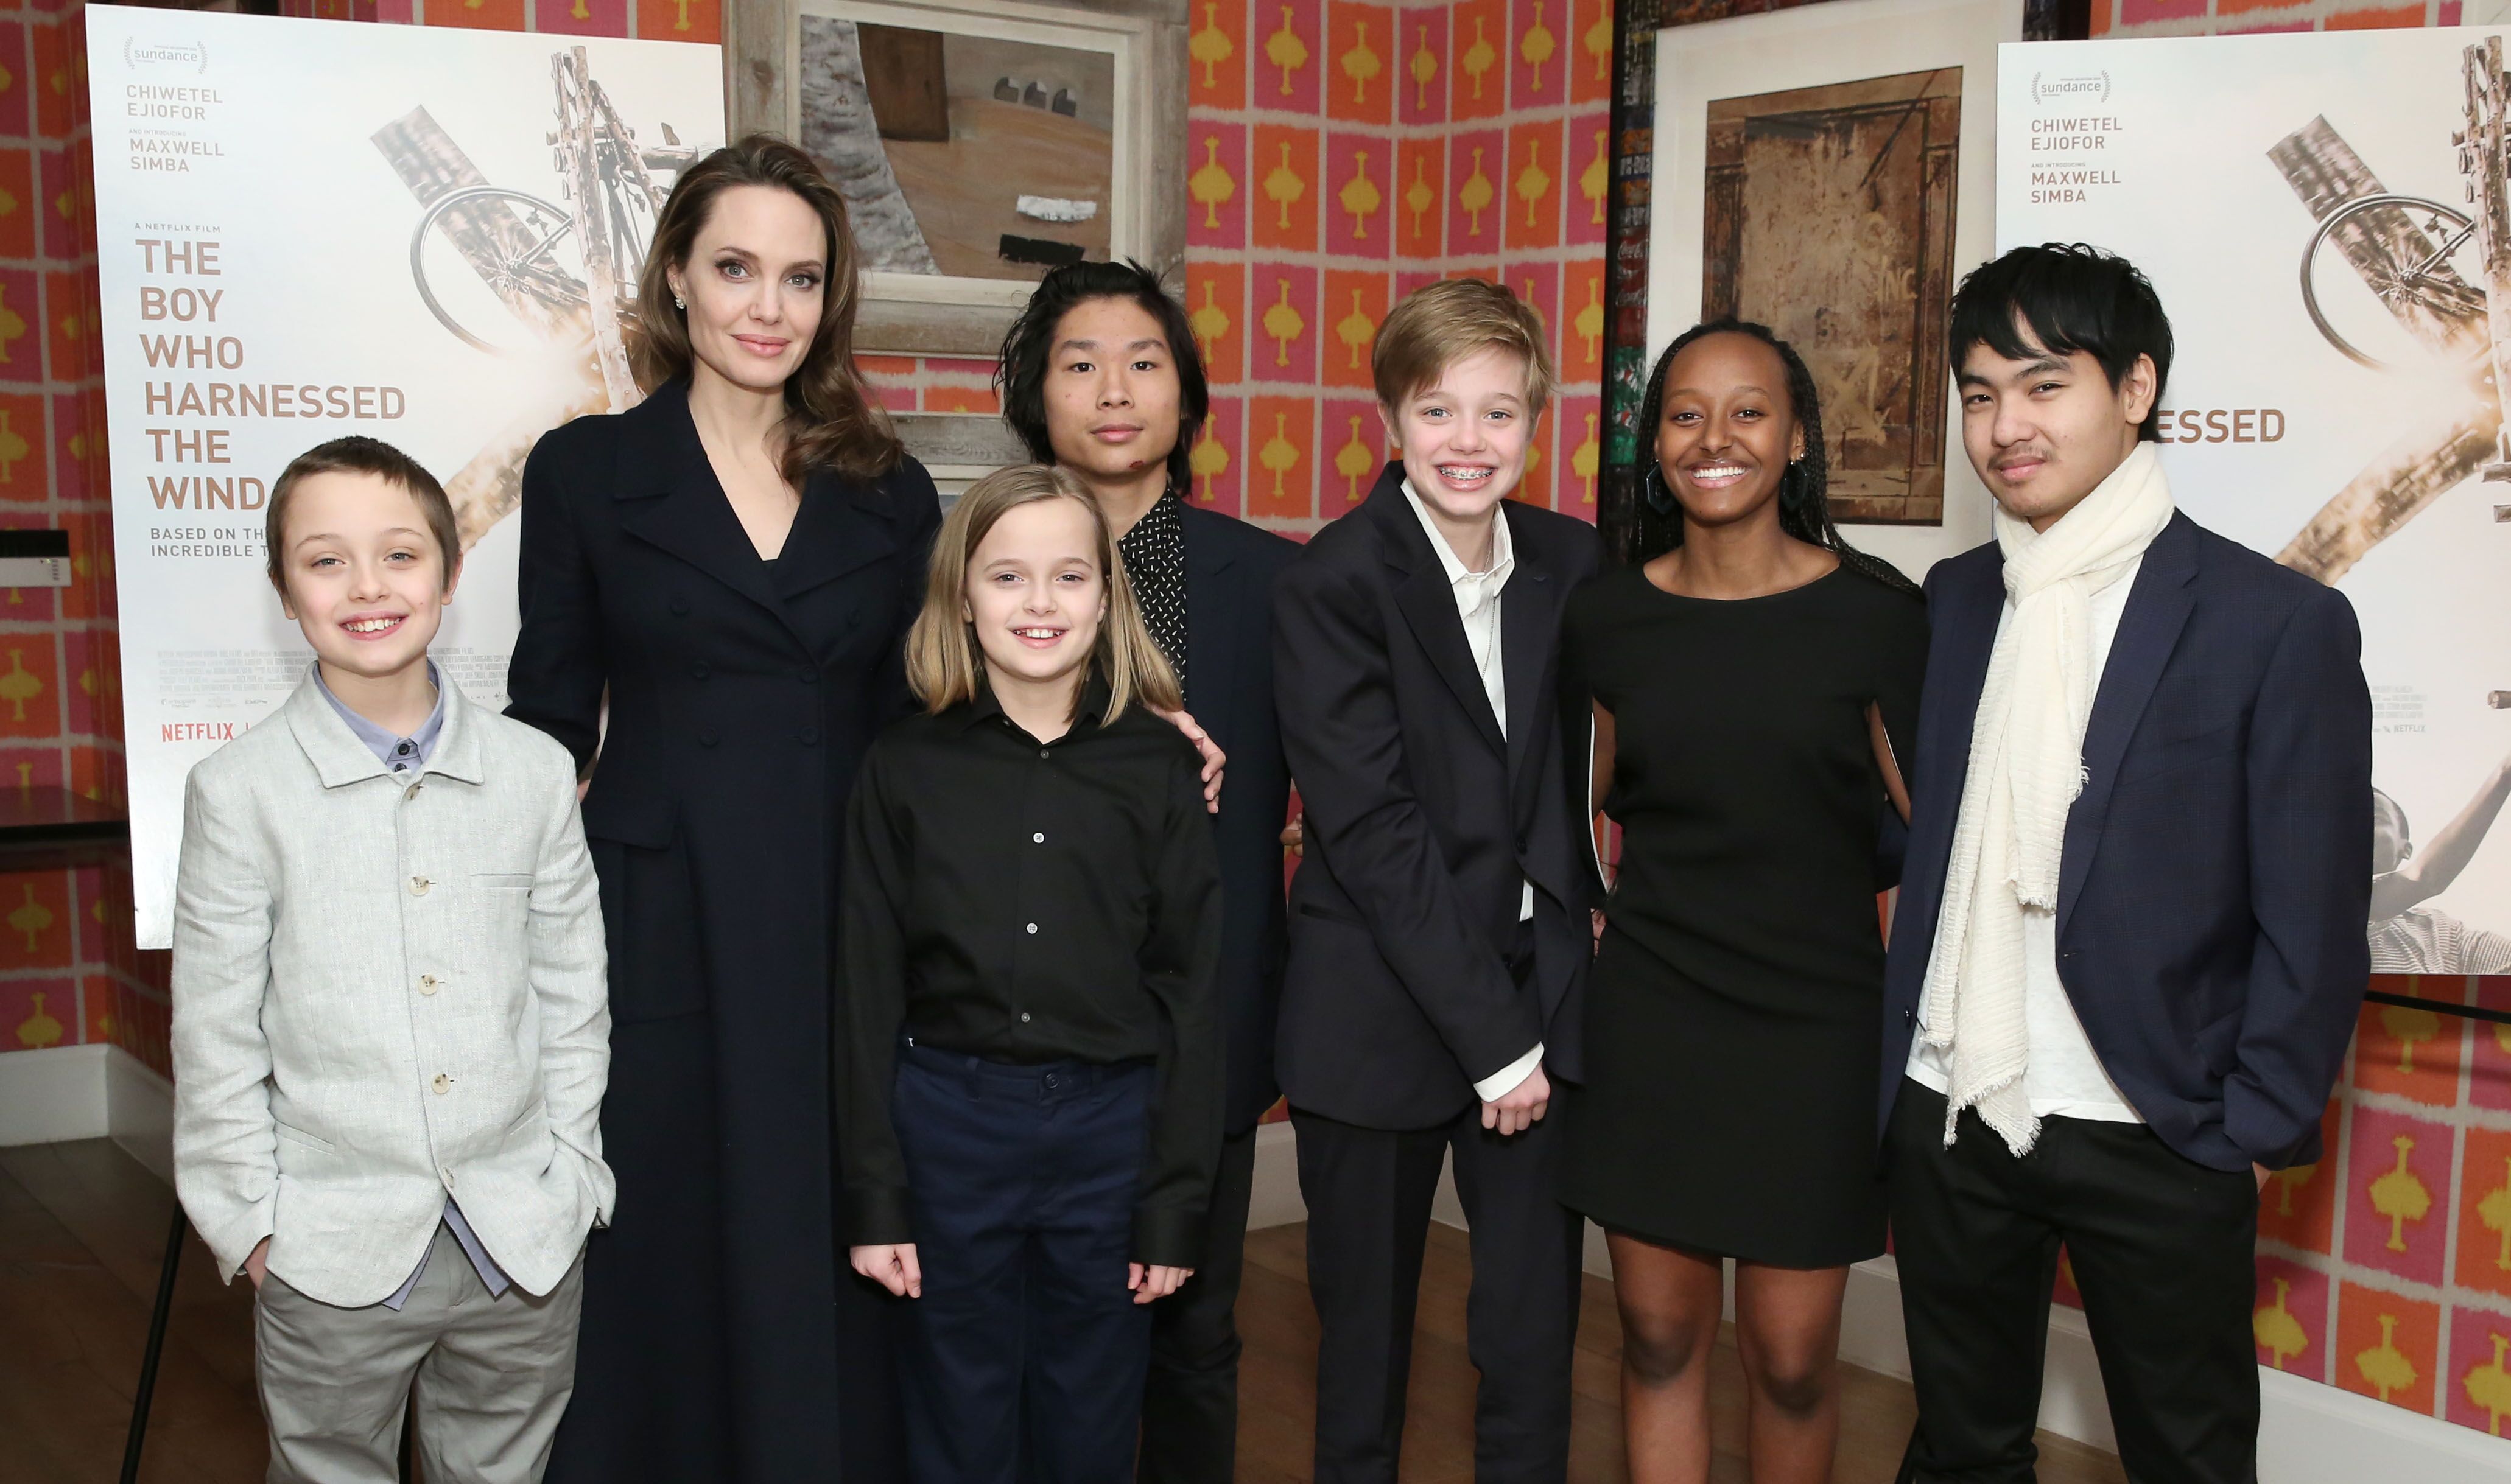 Angelina Jolie with children Knox, Vivienne, Pax, Shiloh, Zahara and Maddox Jolie-Pitt attend "The Boy Who Harnessed The Wind" screening in  2019 | Photo: Getty Images